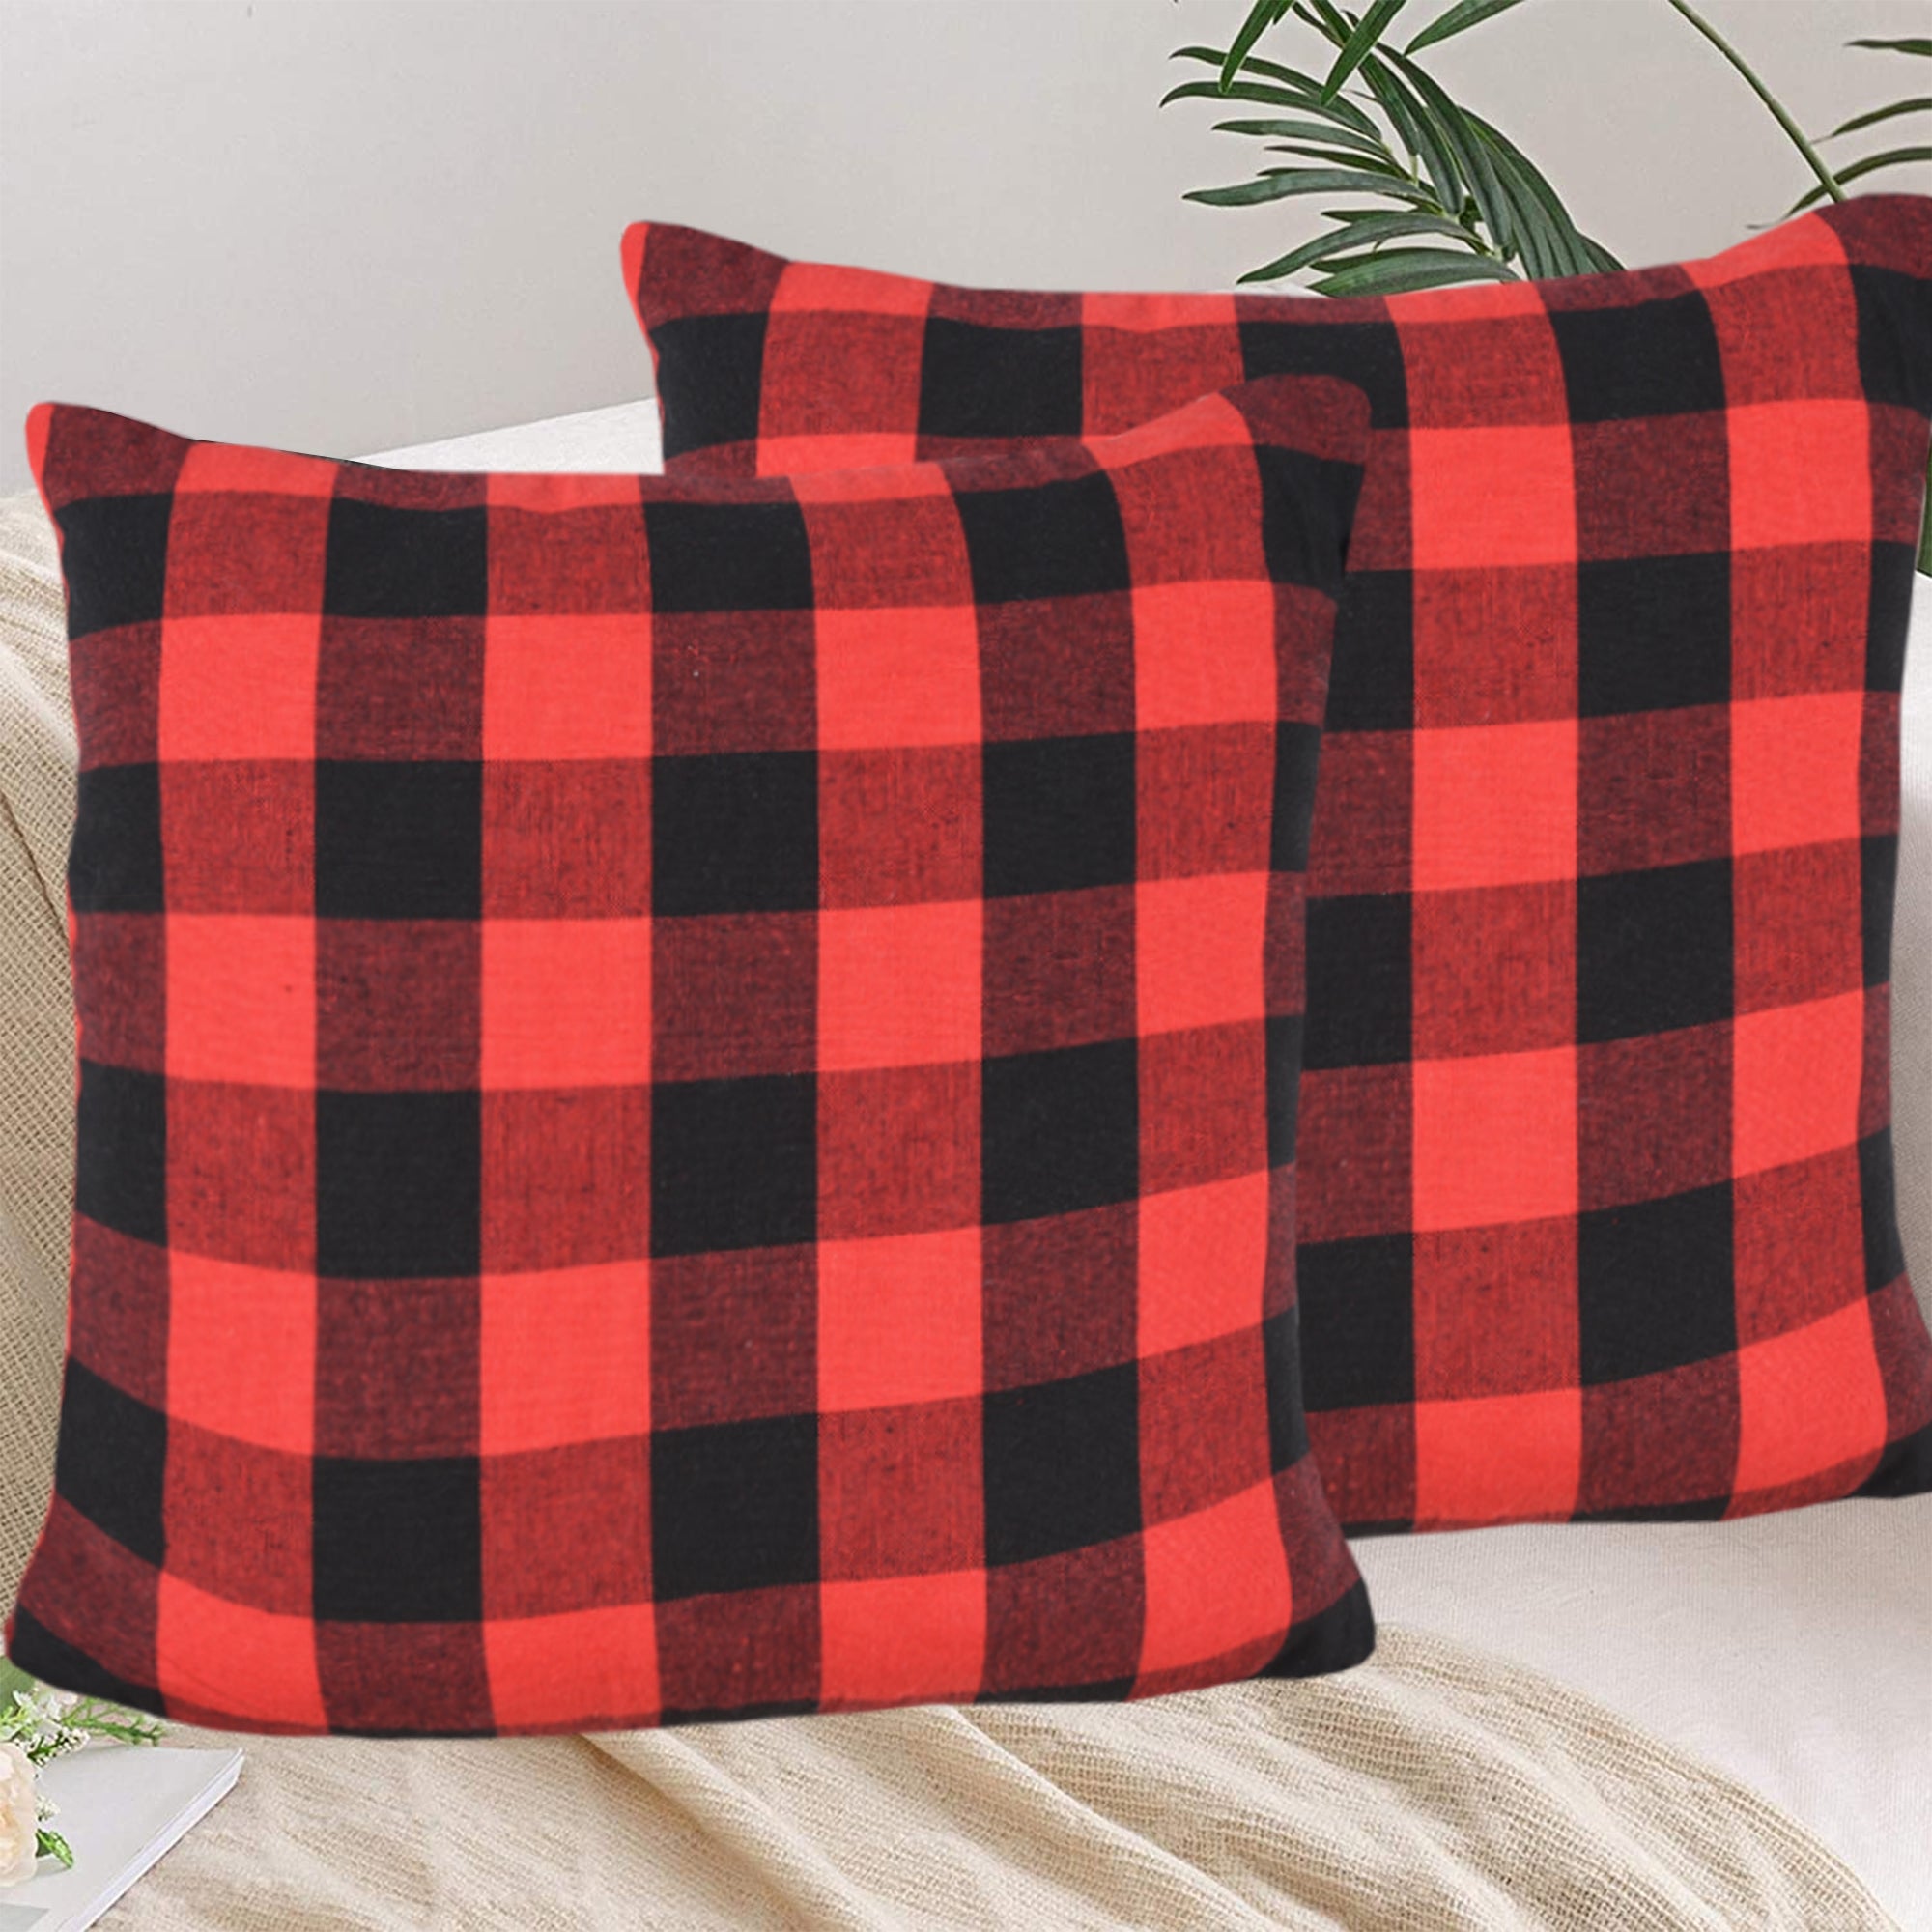 Lushomes Square Cushion Cover, Cotton Sofa Pillow Cover set of 4, 16x16 Inch, Big Checks, Red and Black Checks, Pillow Cushions Covers (Pack of 4, 40x40 Cms)